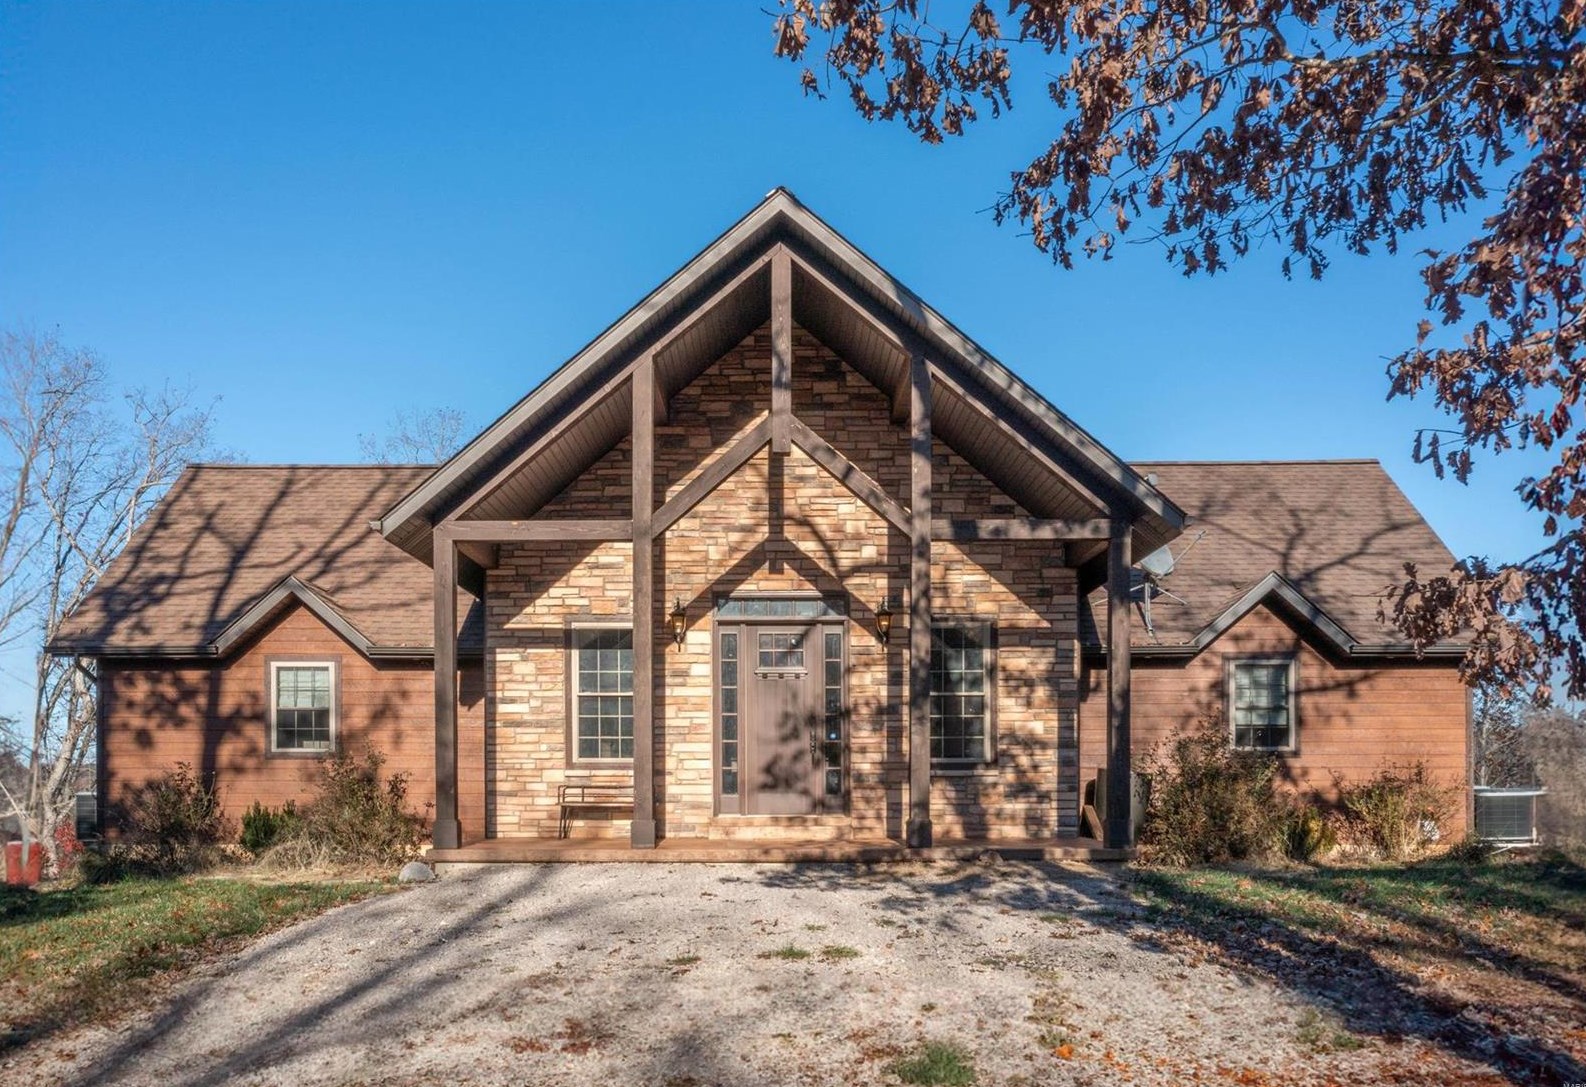 12270 Anthonies Mill Rd, Bourbon, MO 65441